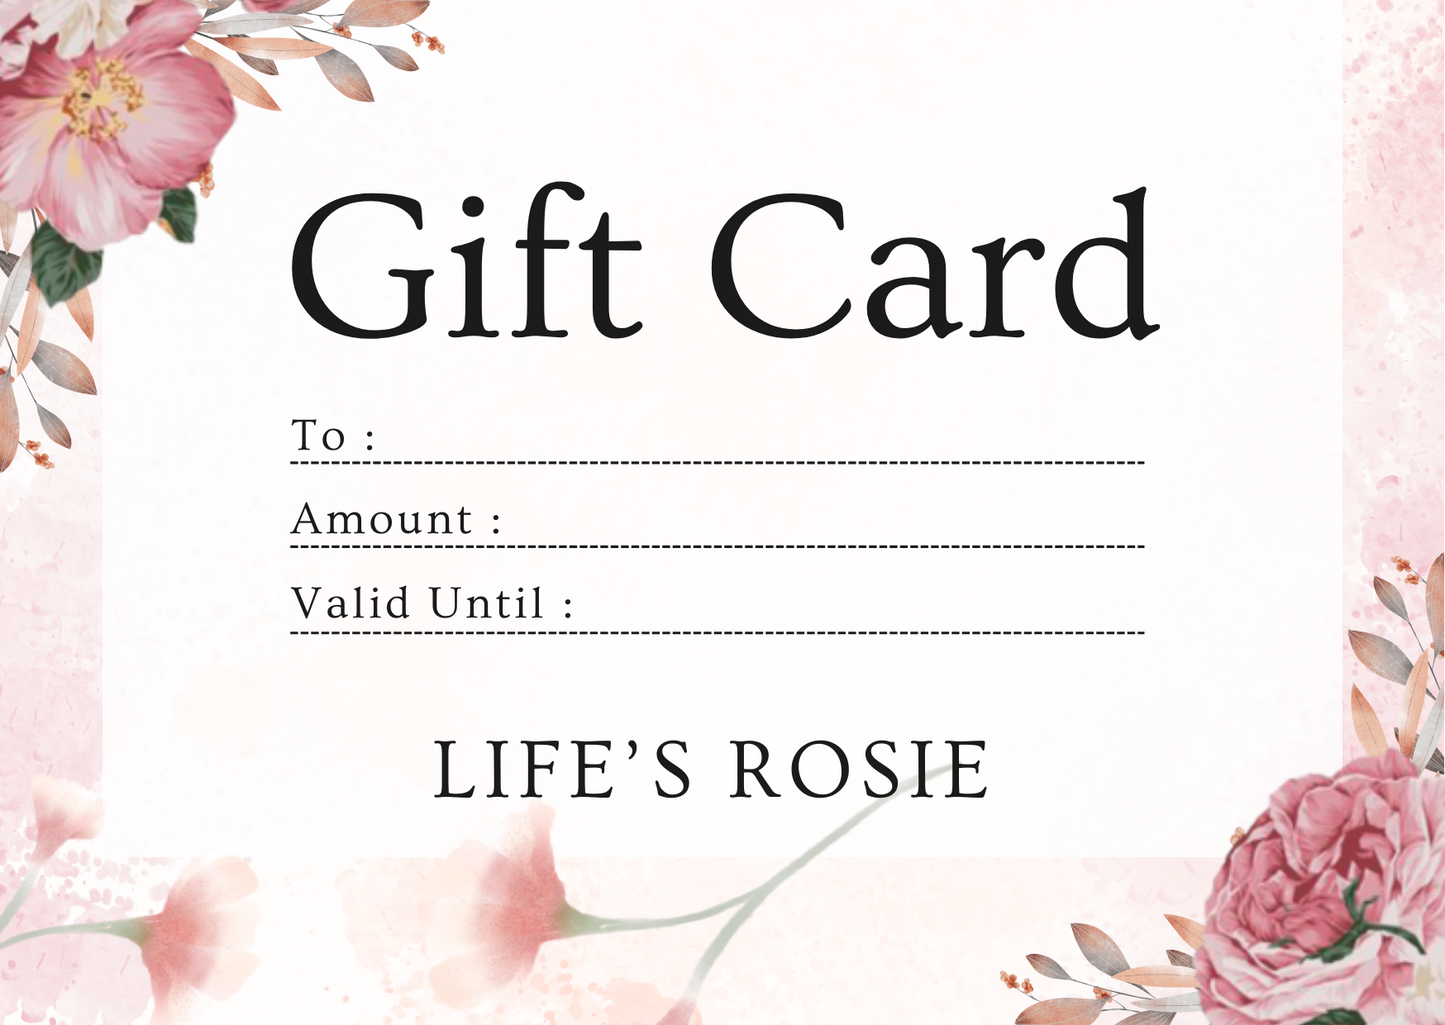 LIFE'S ROSIE GIFT CARD